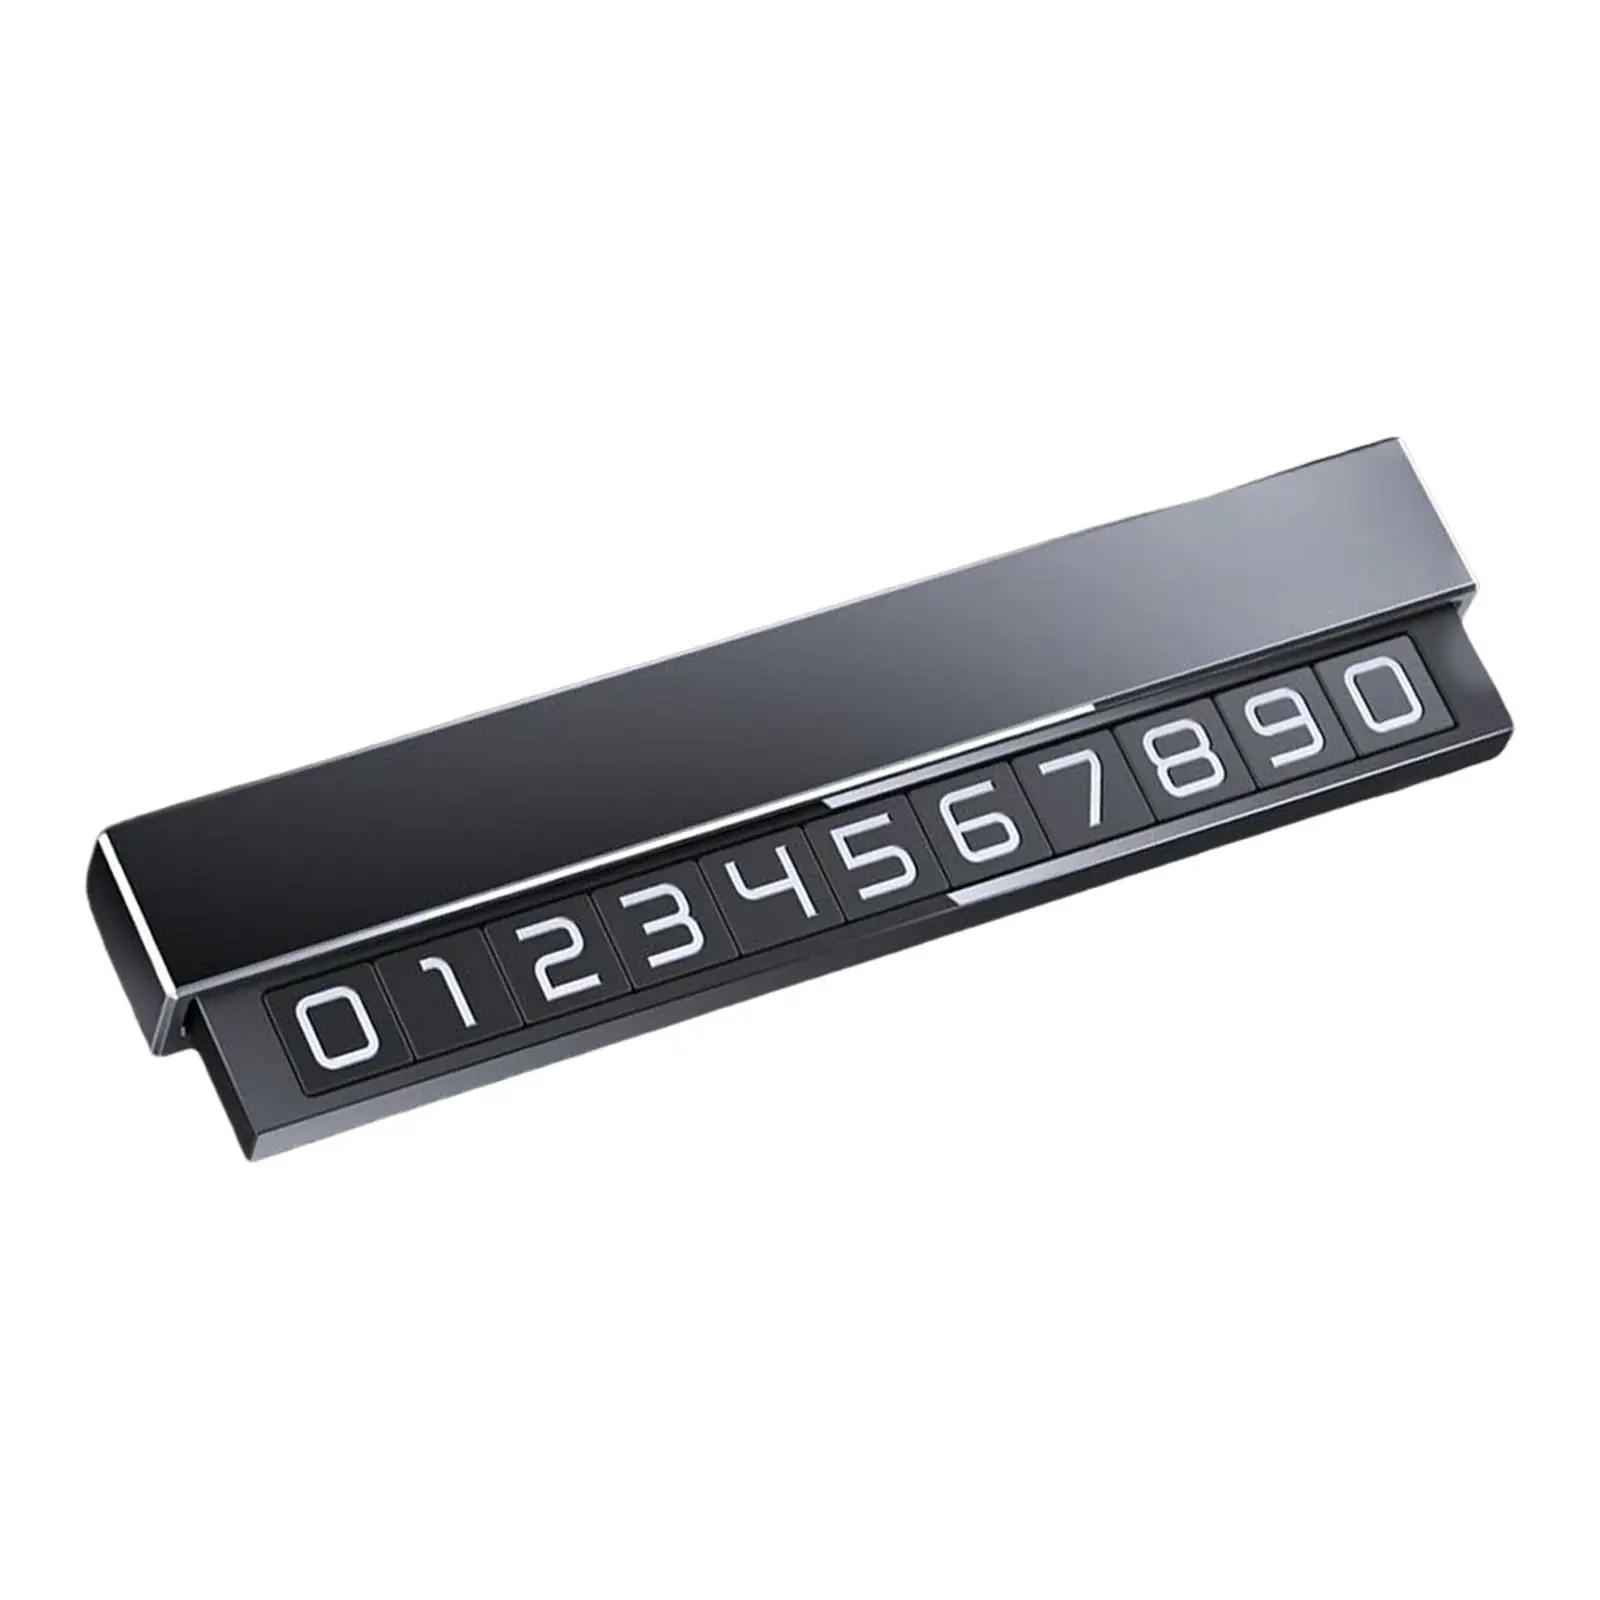 Car Temporary Parking Sign Automobile Accessories High Temperature Resistance Luminous Phone Number Card Plate for Parking